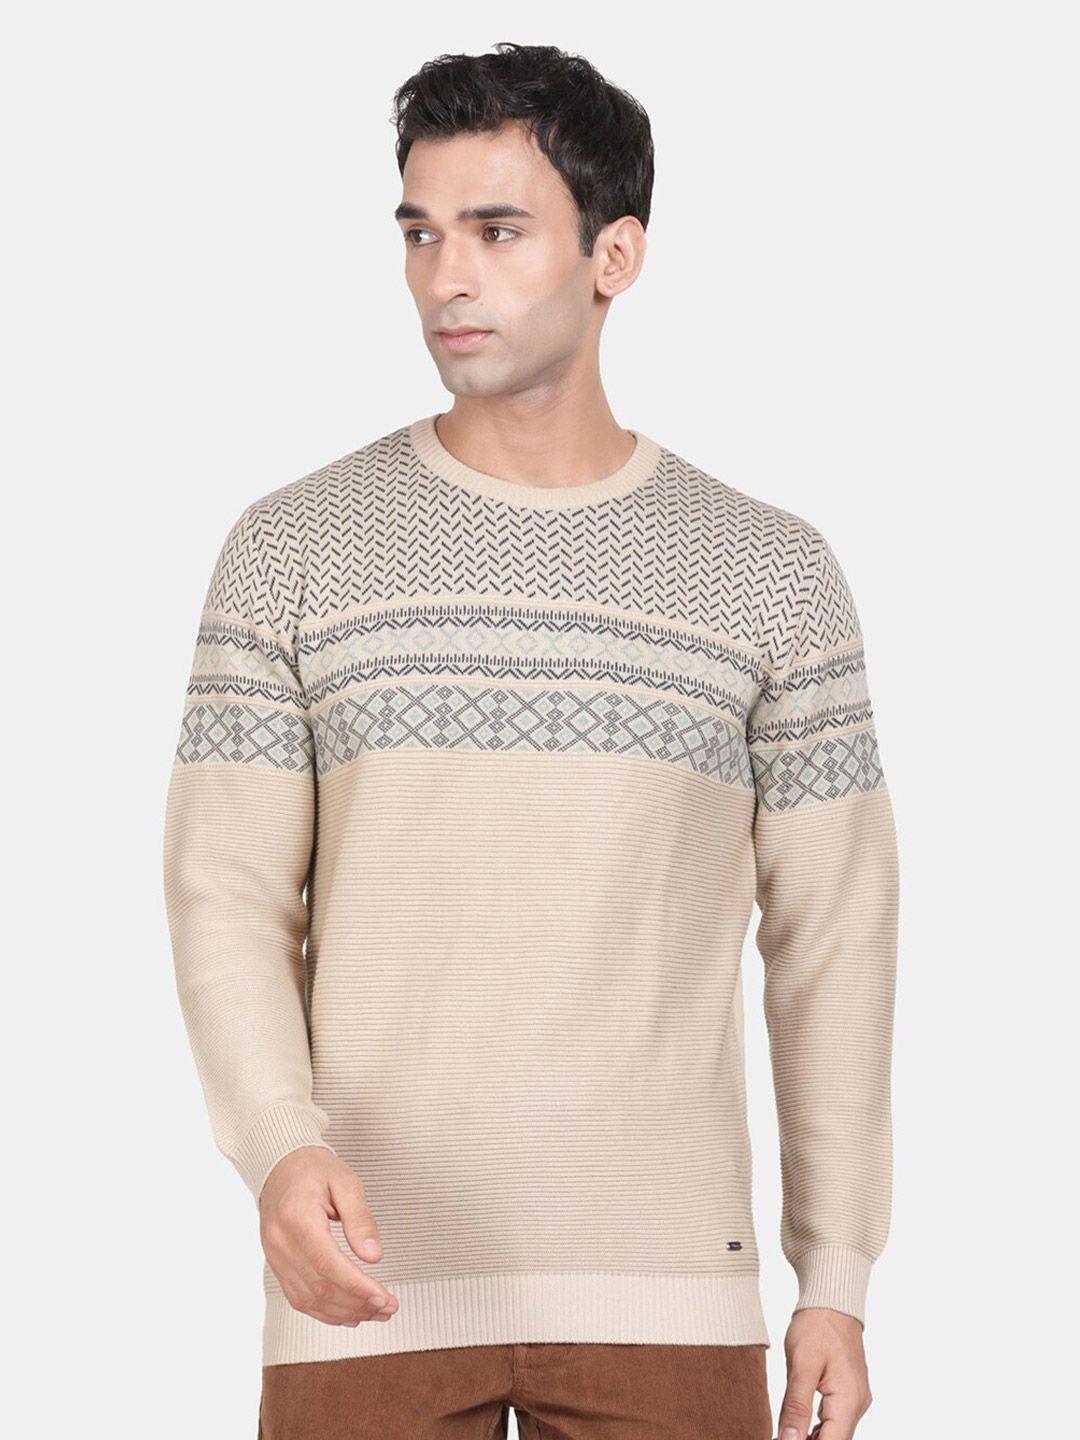 t-base-geometric-printed-round-neck-cotton-pullover